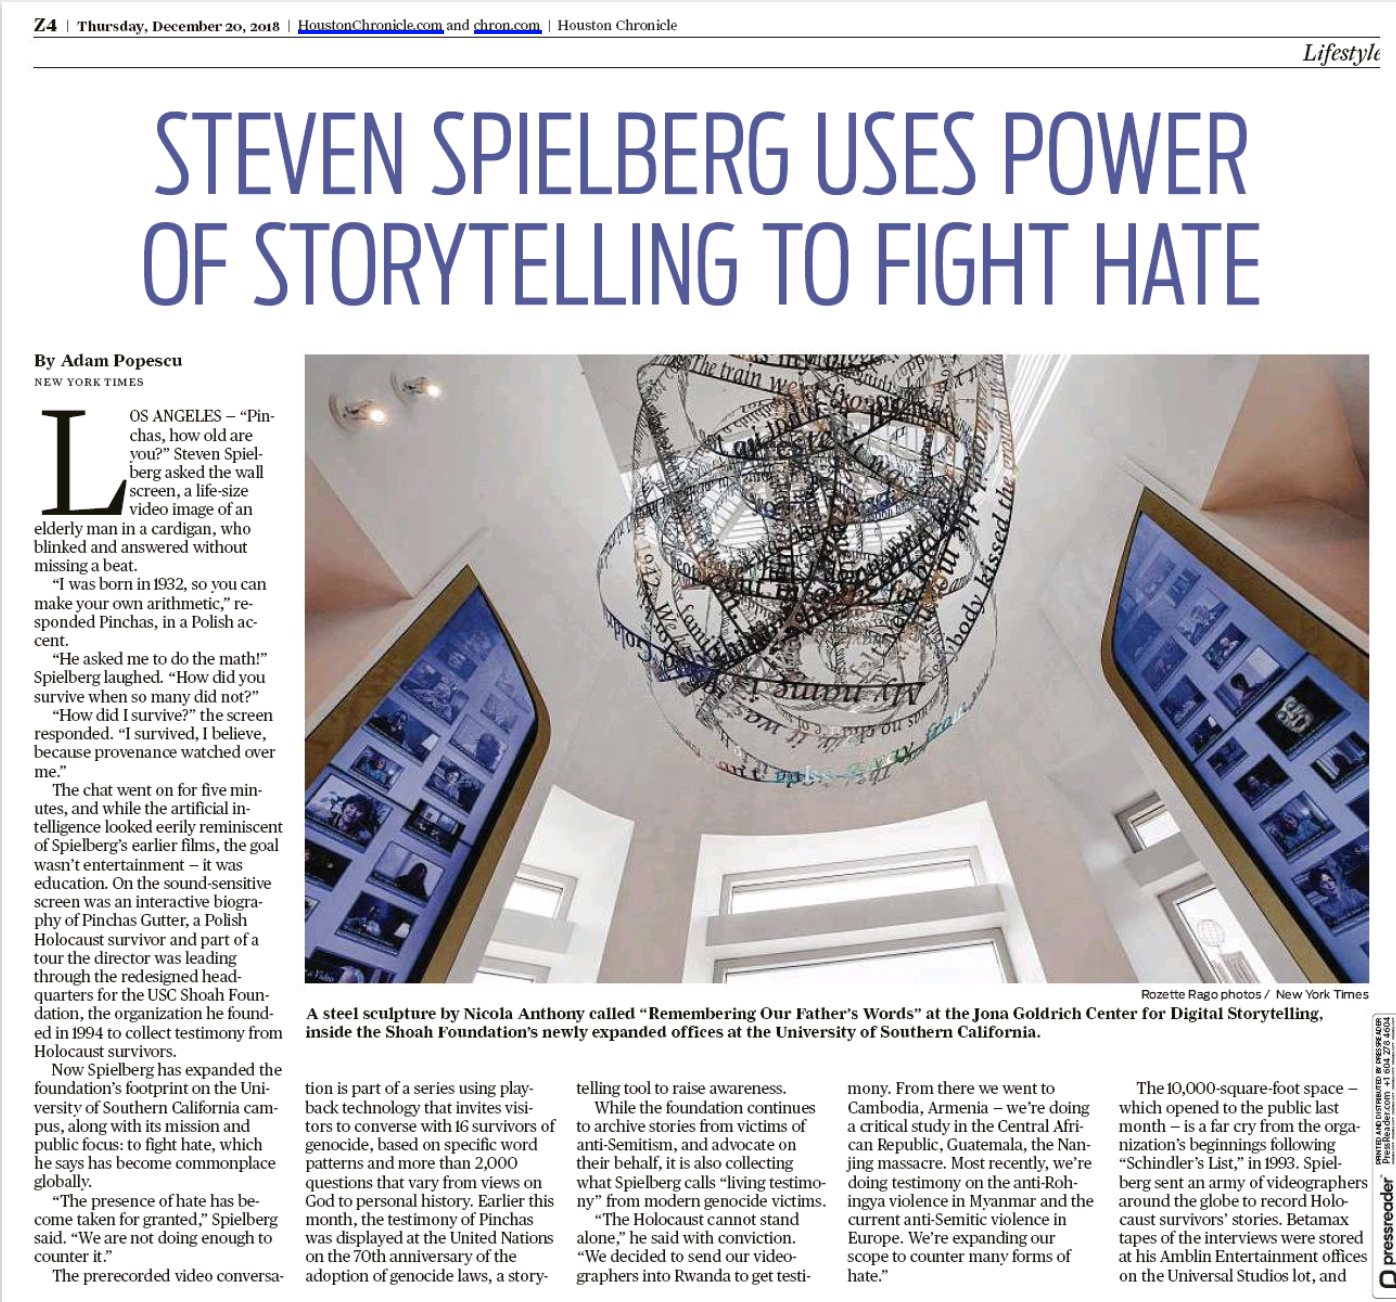 HoustonChronicle_Genocide-Testimonies-Steven-Spielberg-on-storytelling_s-power-to-fight-hate_20_12_18Cover